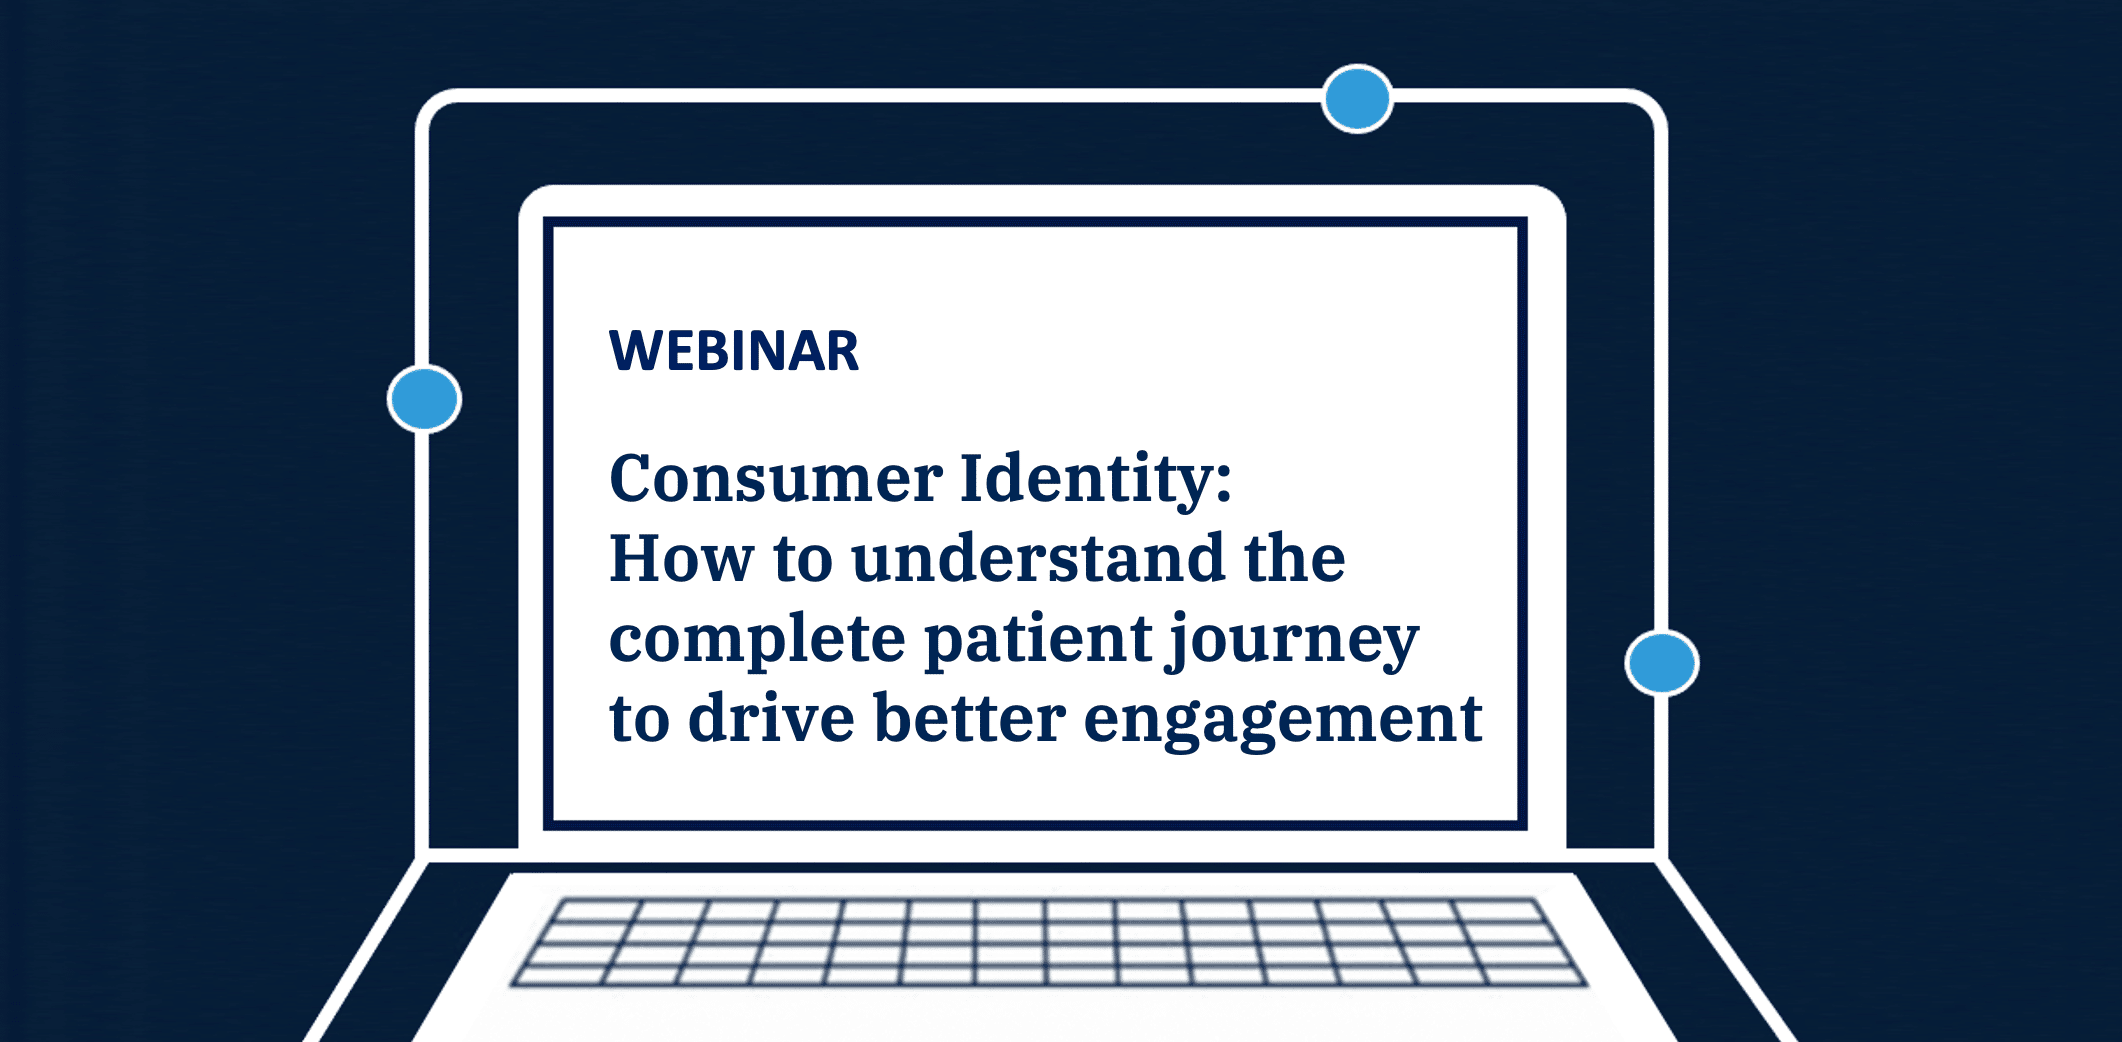 Consumer Identity: How to understand the complete patient journey to drive better engagement